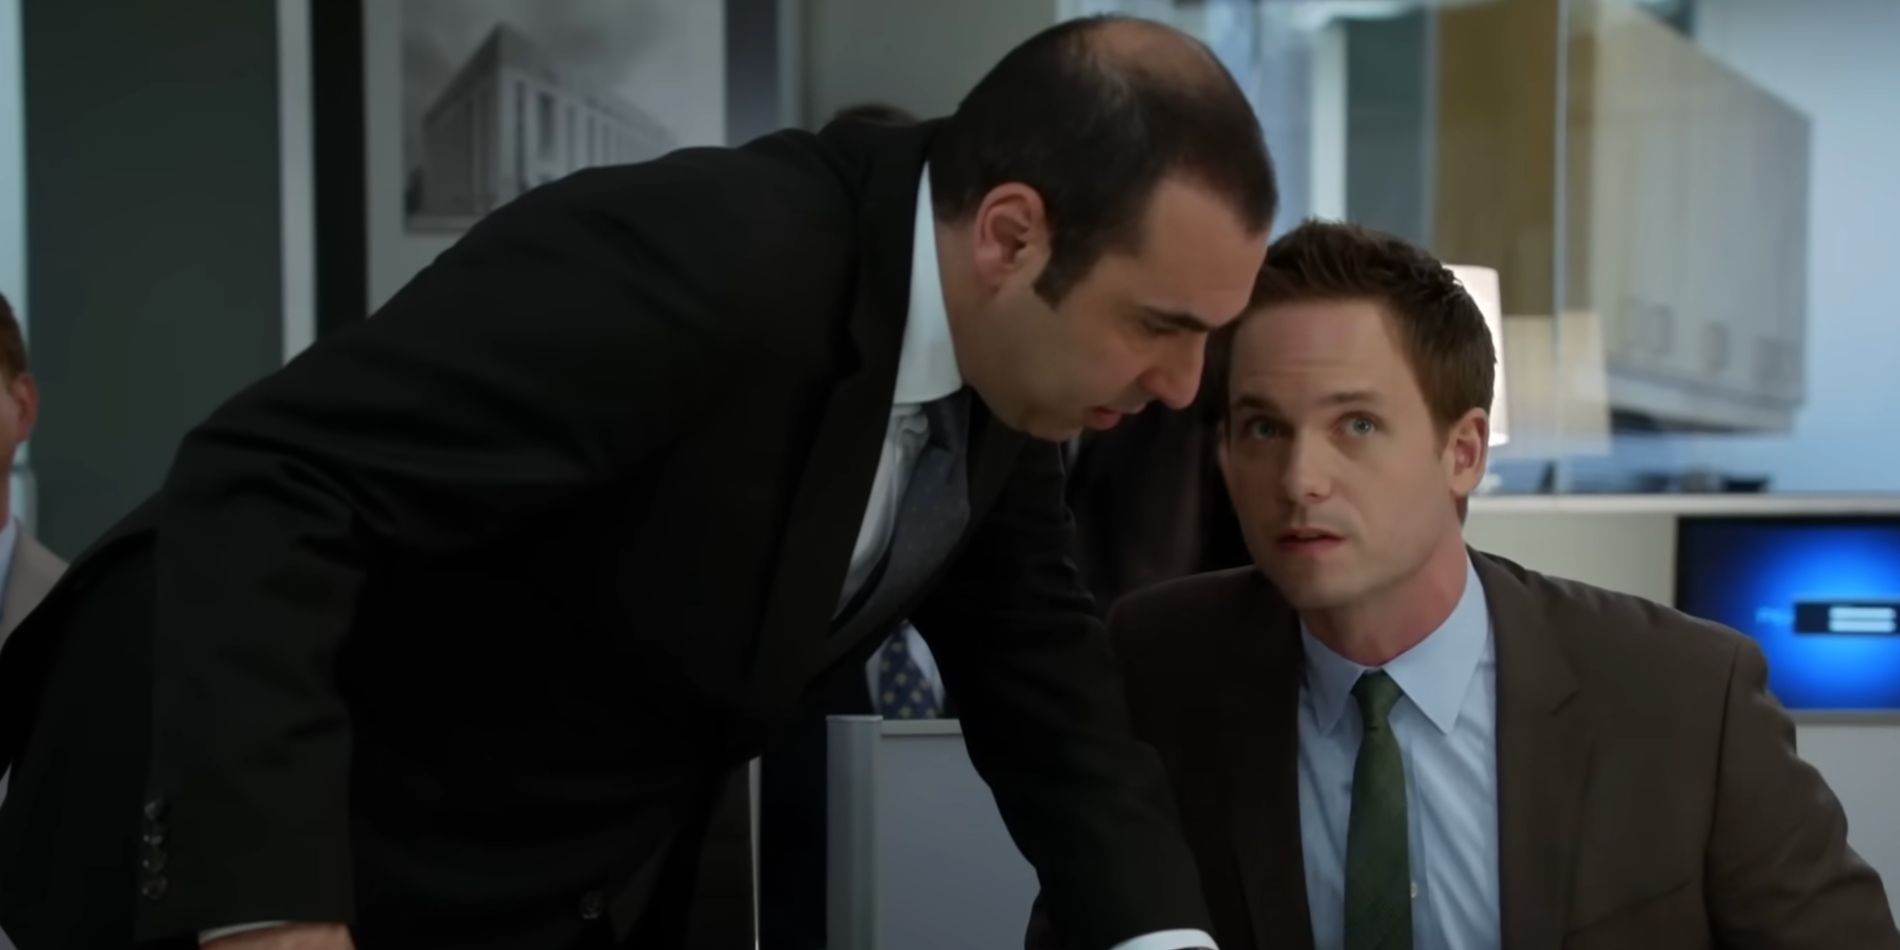 Suits Massive Netflix Success Reveals 1 Harsh Truth About The TV Streaming Era